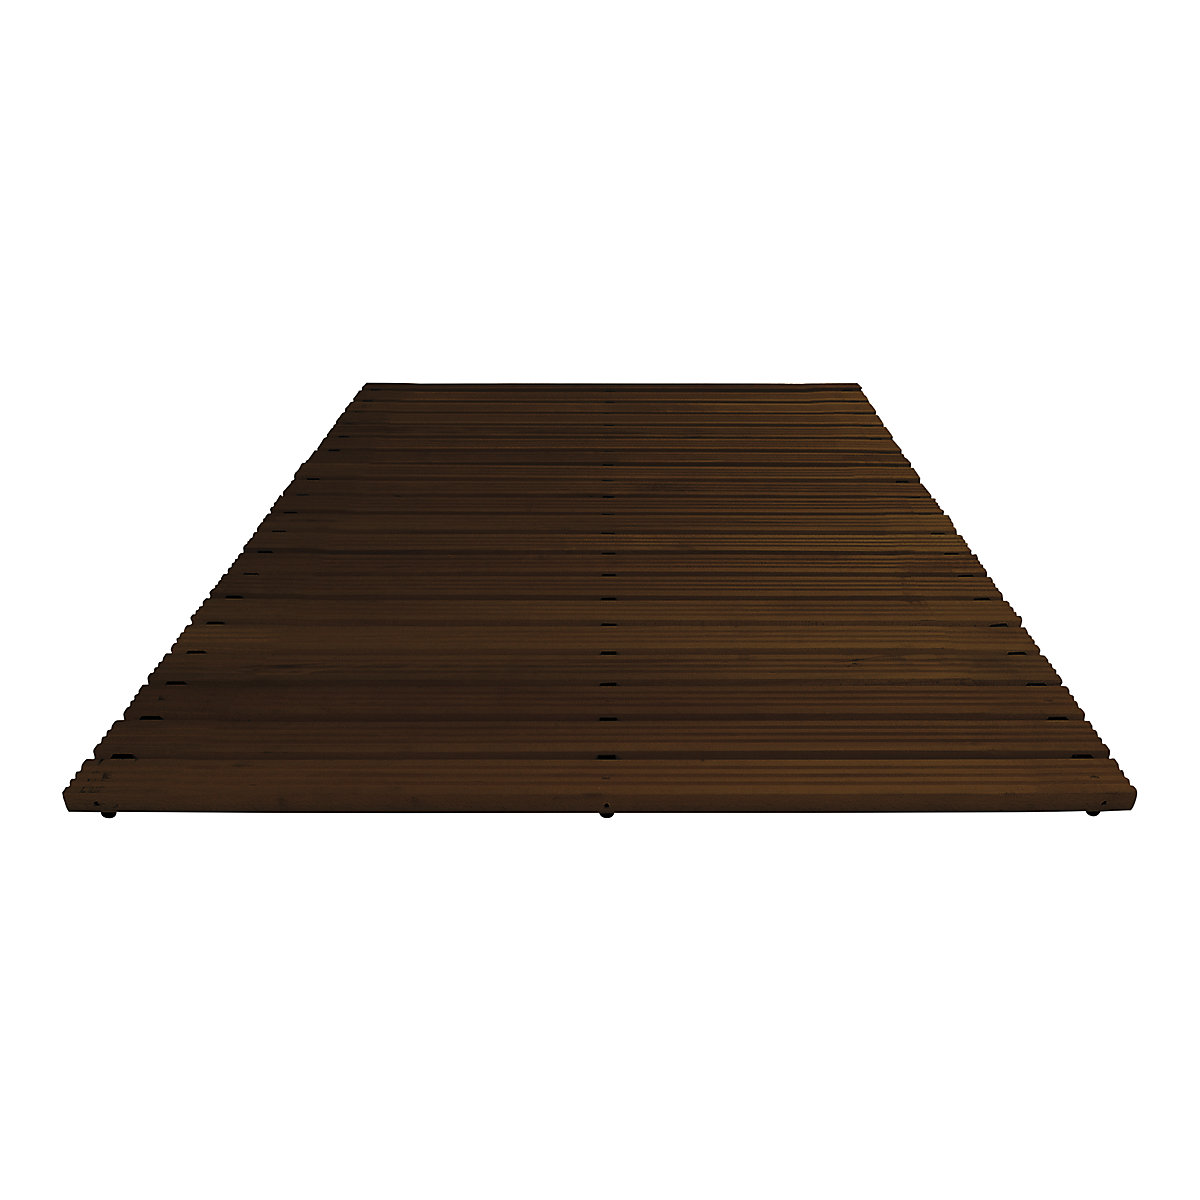 Wooden safety grid, dark stain, per metre, without bevelled edge, width 1200 mm